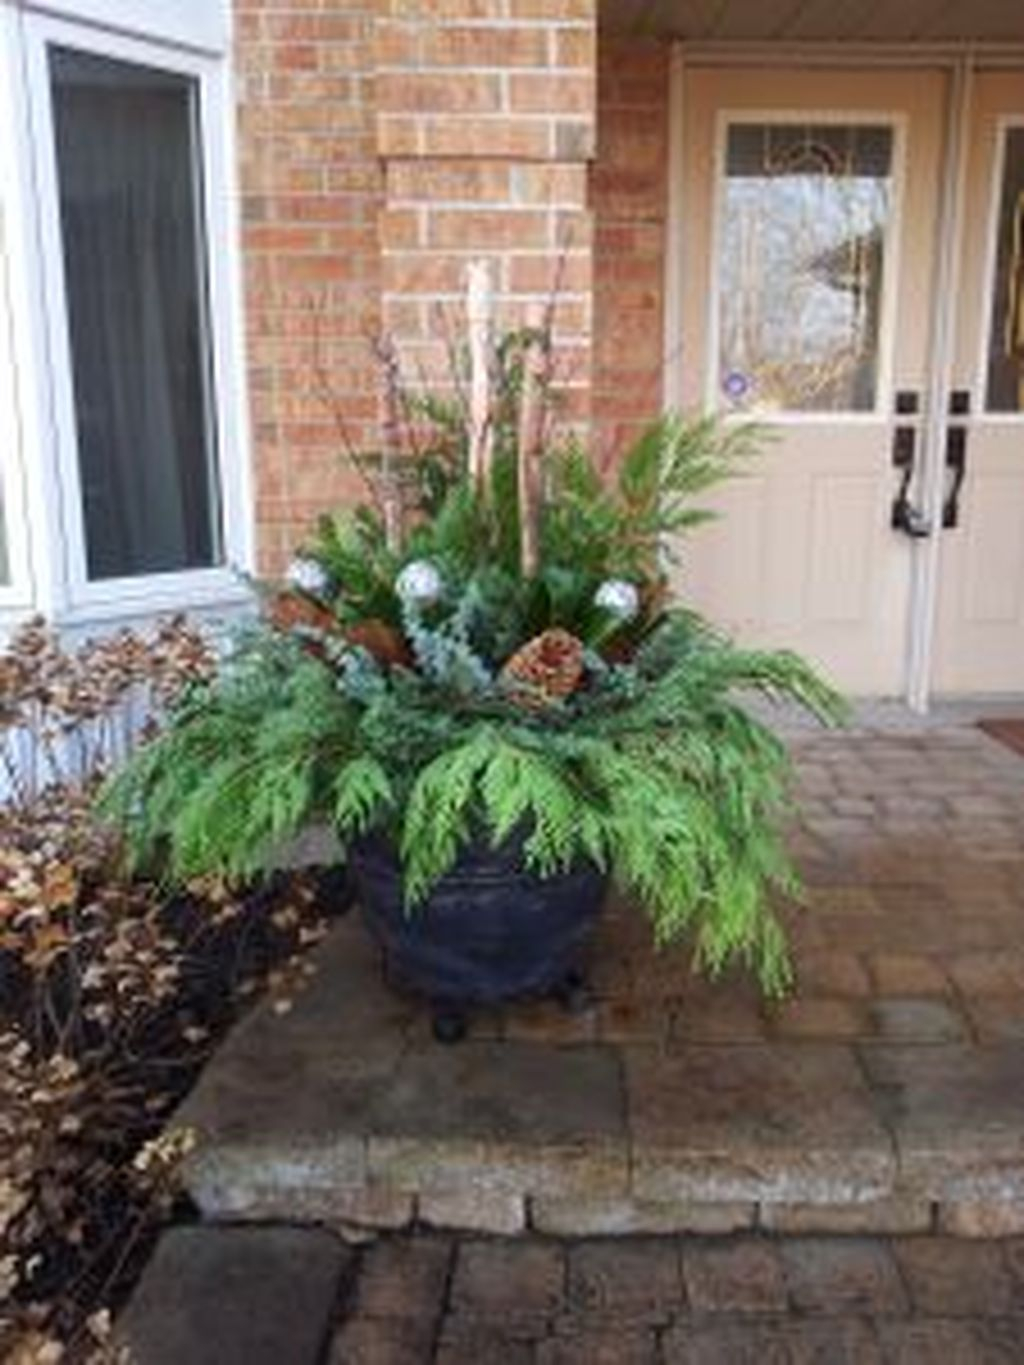 Marvelous Outdoor Holiday Planter Ideas To Beauty Porch Décor 38